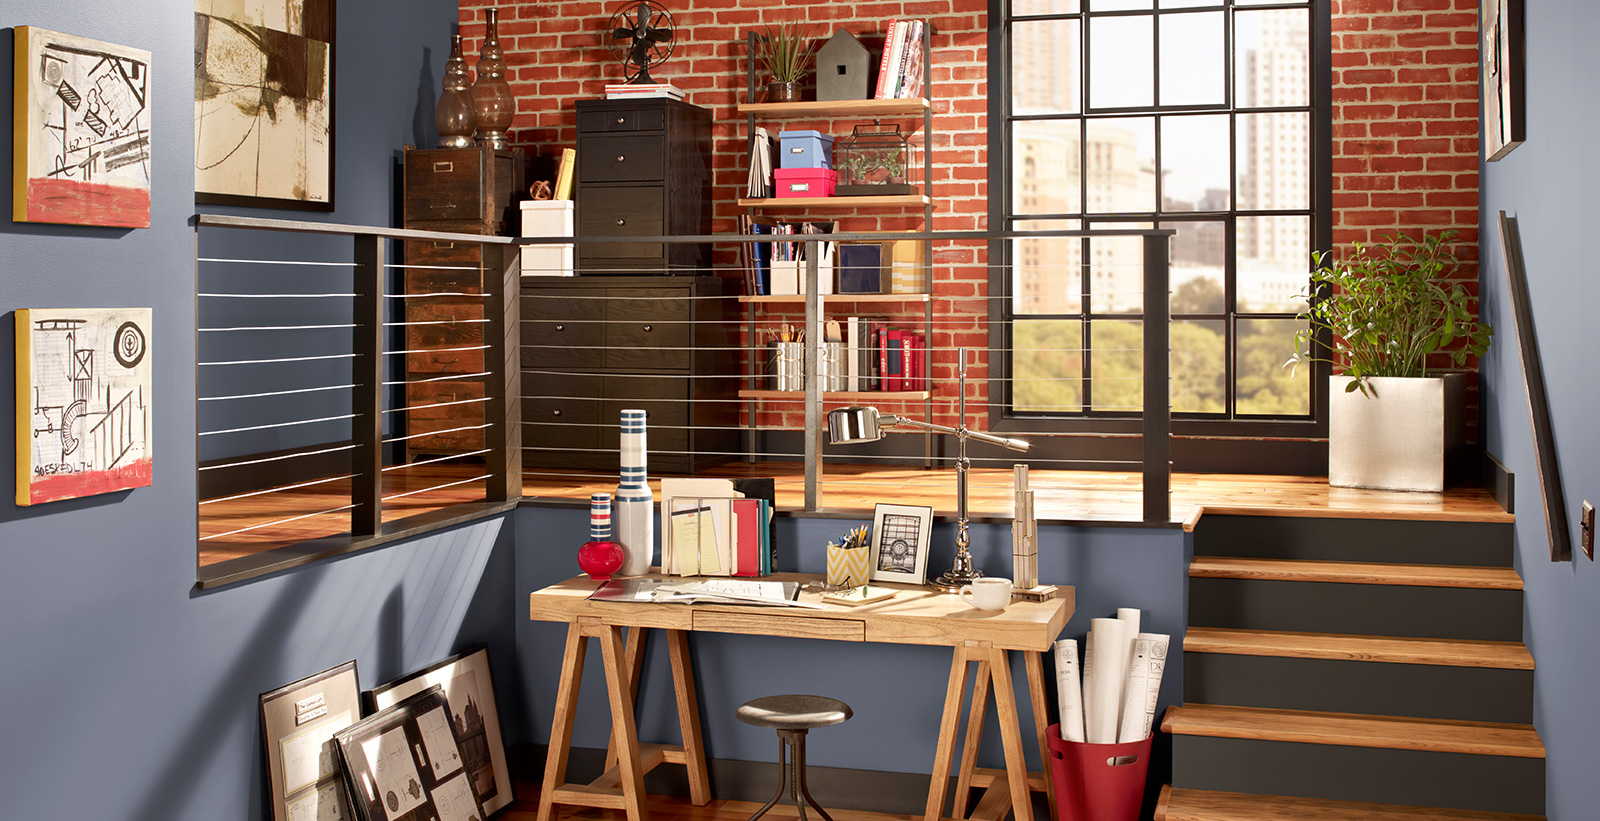 Industrial office workspace with blue walls and brown trim, wooden desk, relaxed and calming style.